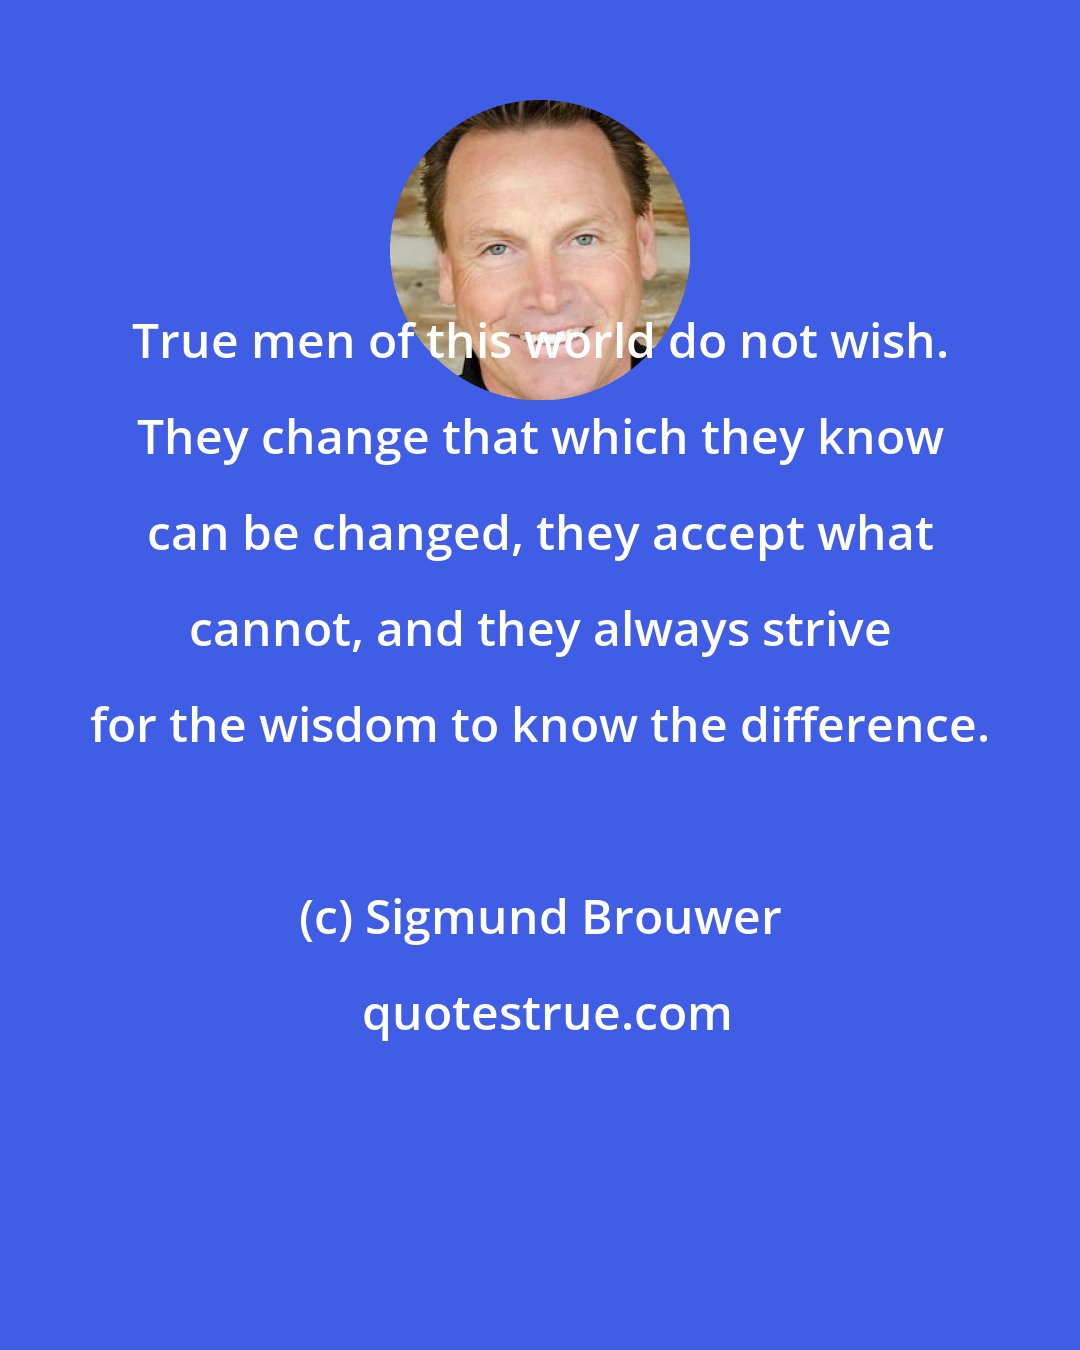 Sigmund Brouwer: True men of this world do not wish. They change that which they know can be changed, they accept what cannot, and they always strive for the wisdom to know the difference.